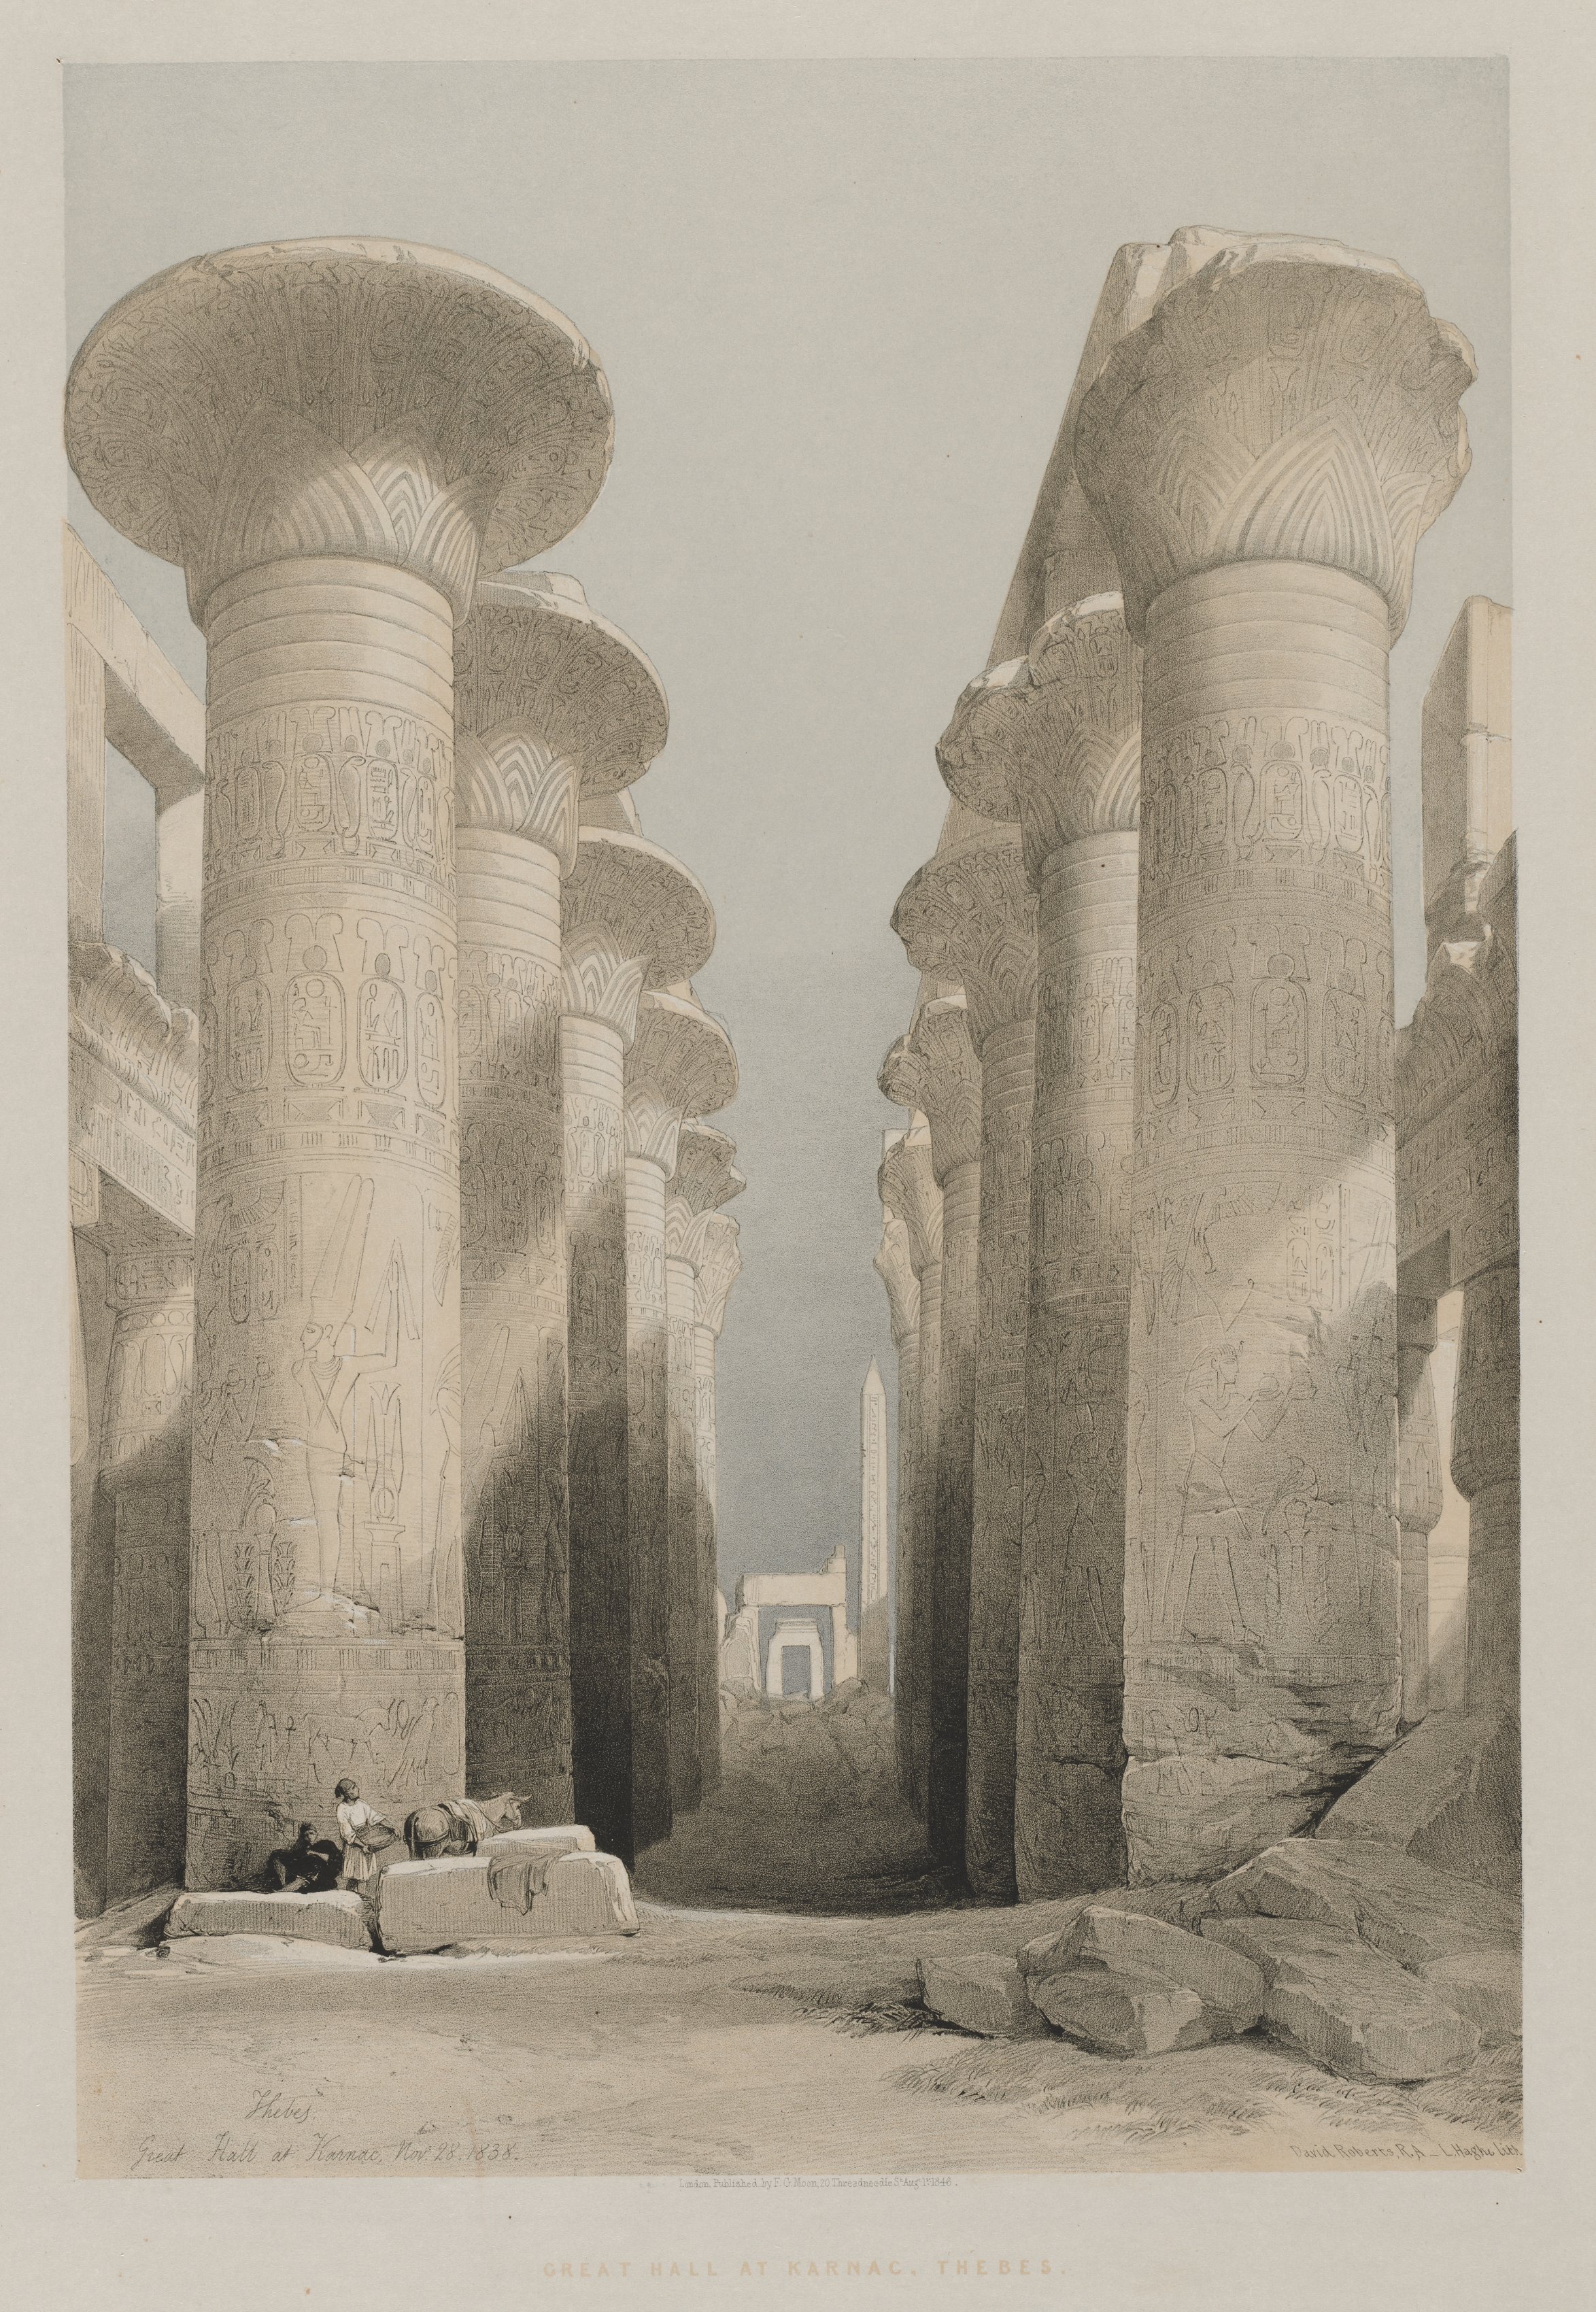 Egypt and Nubia, Volume I: Thebes, Great Hall at Karnac